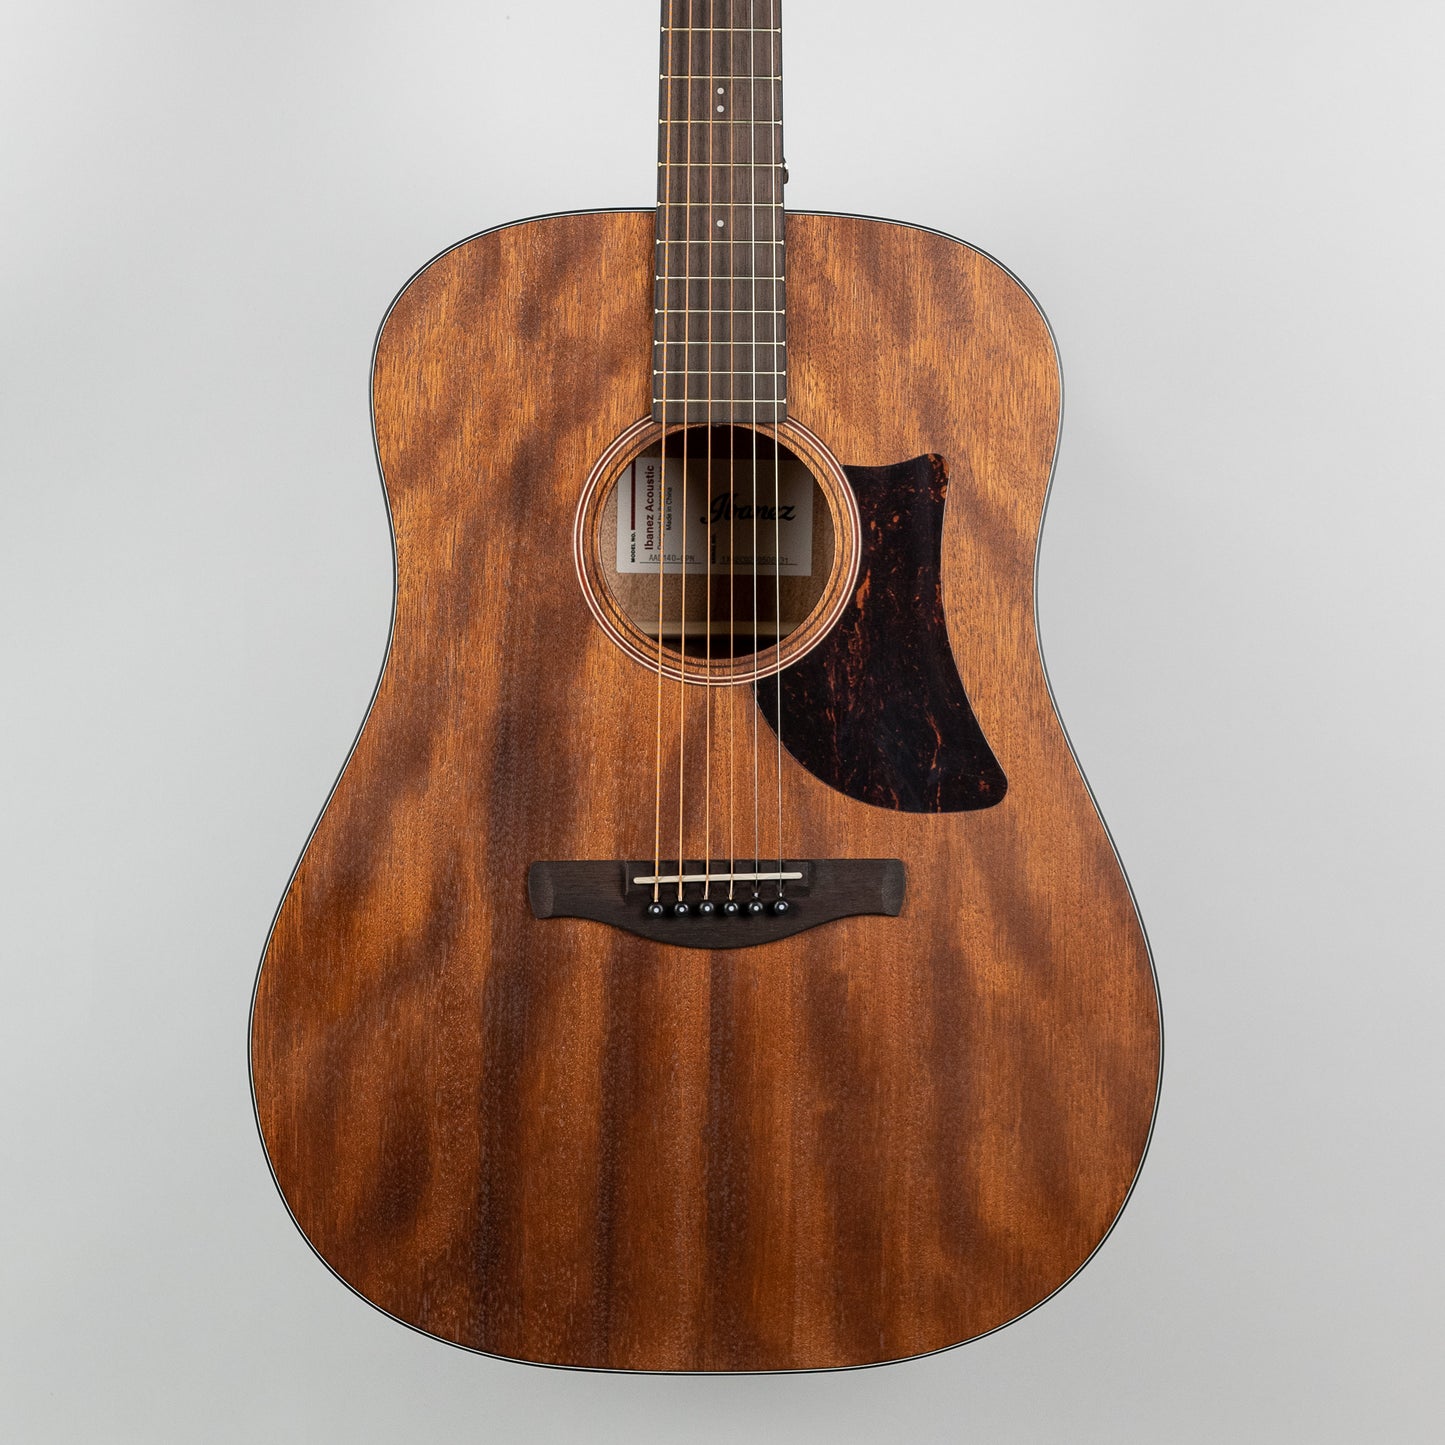 Ibanez AAD140-OPN Acoustic Guitar, Open Pore Natural